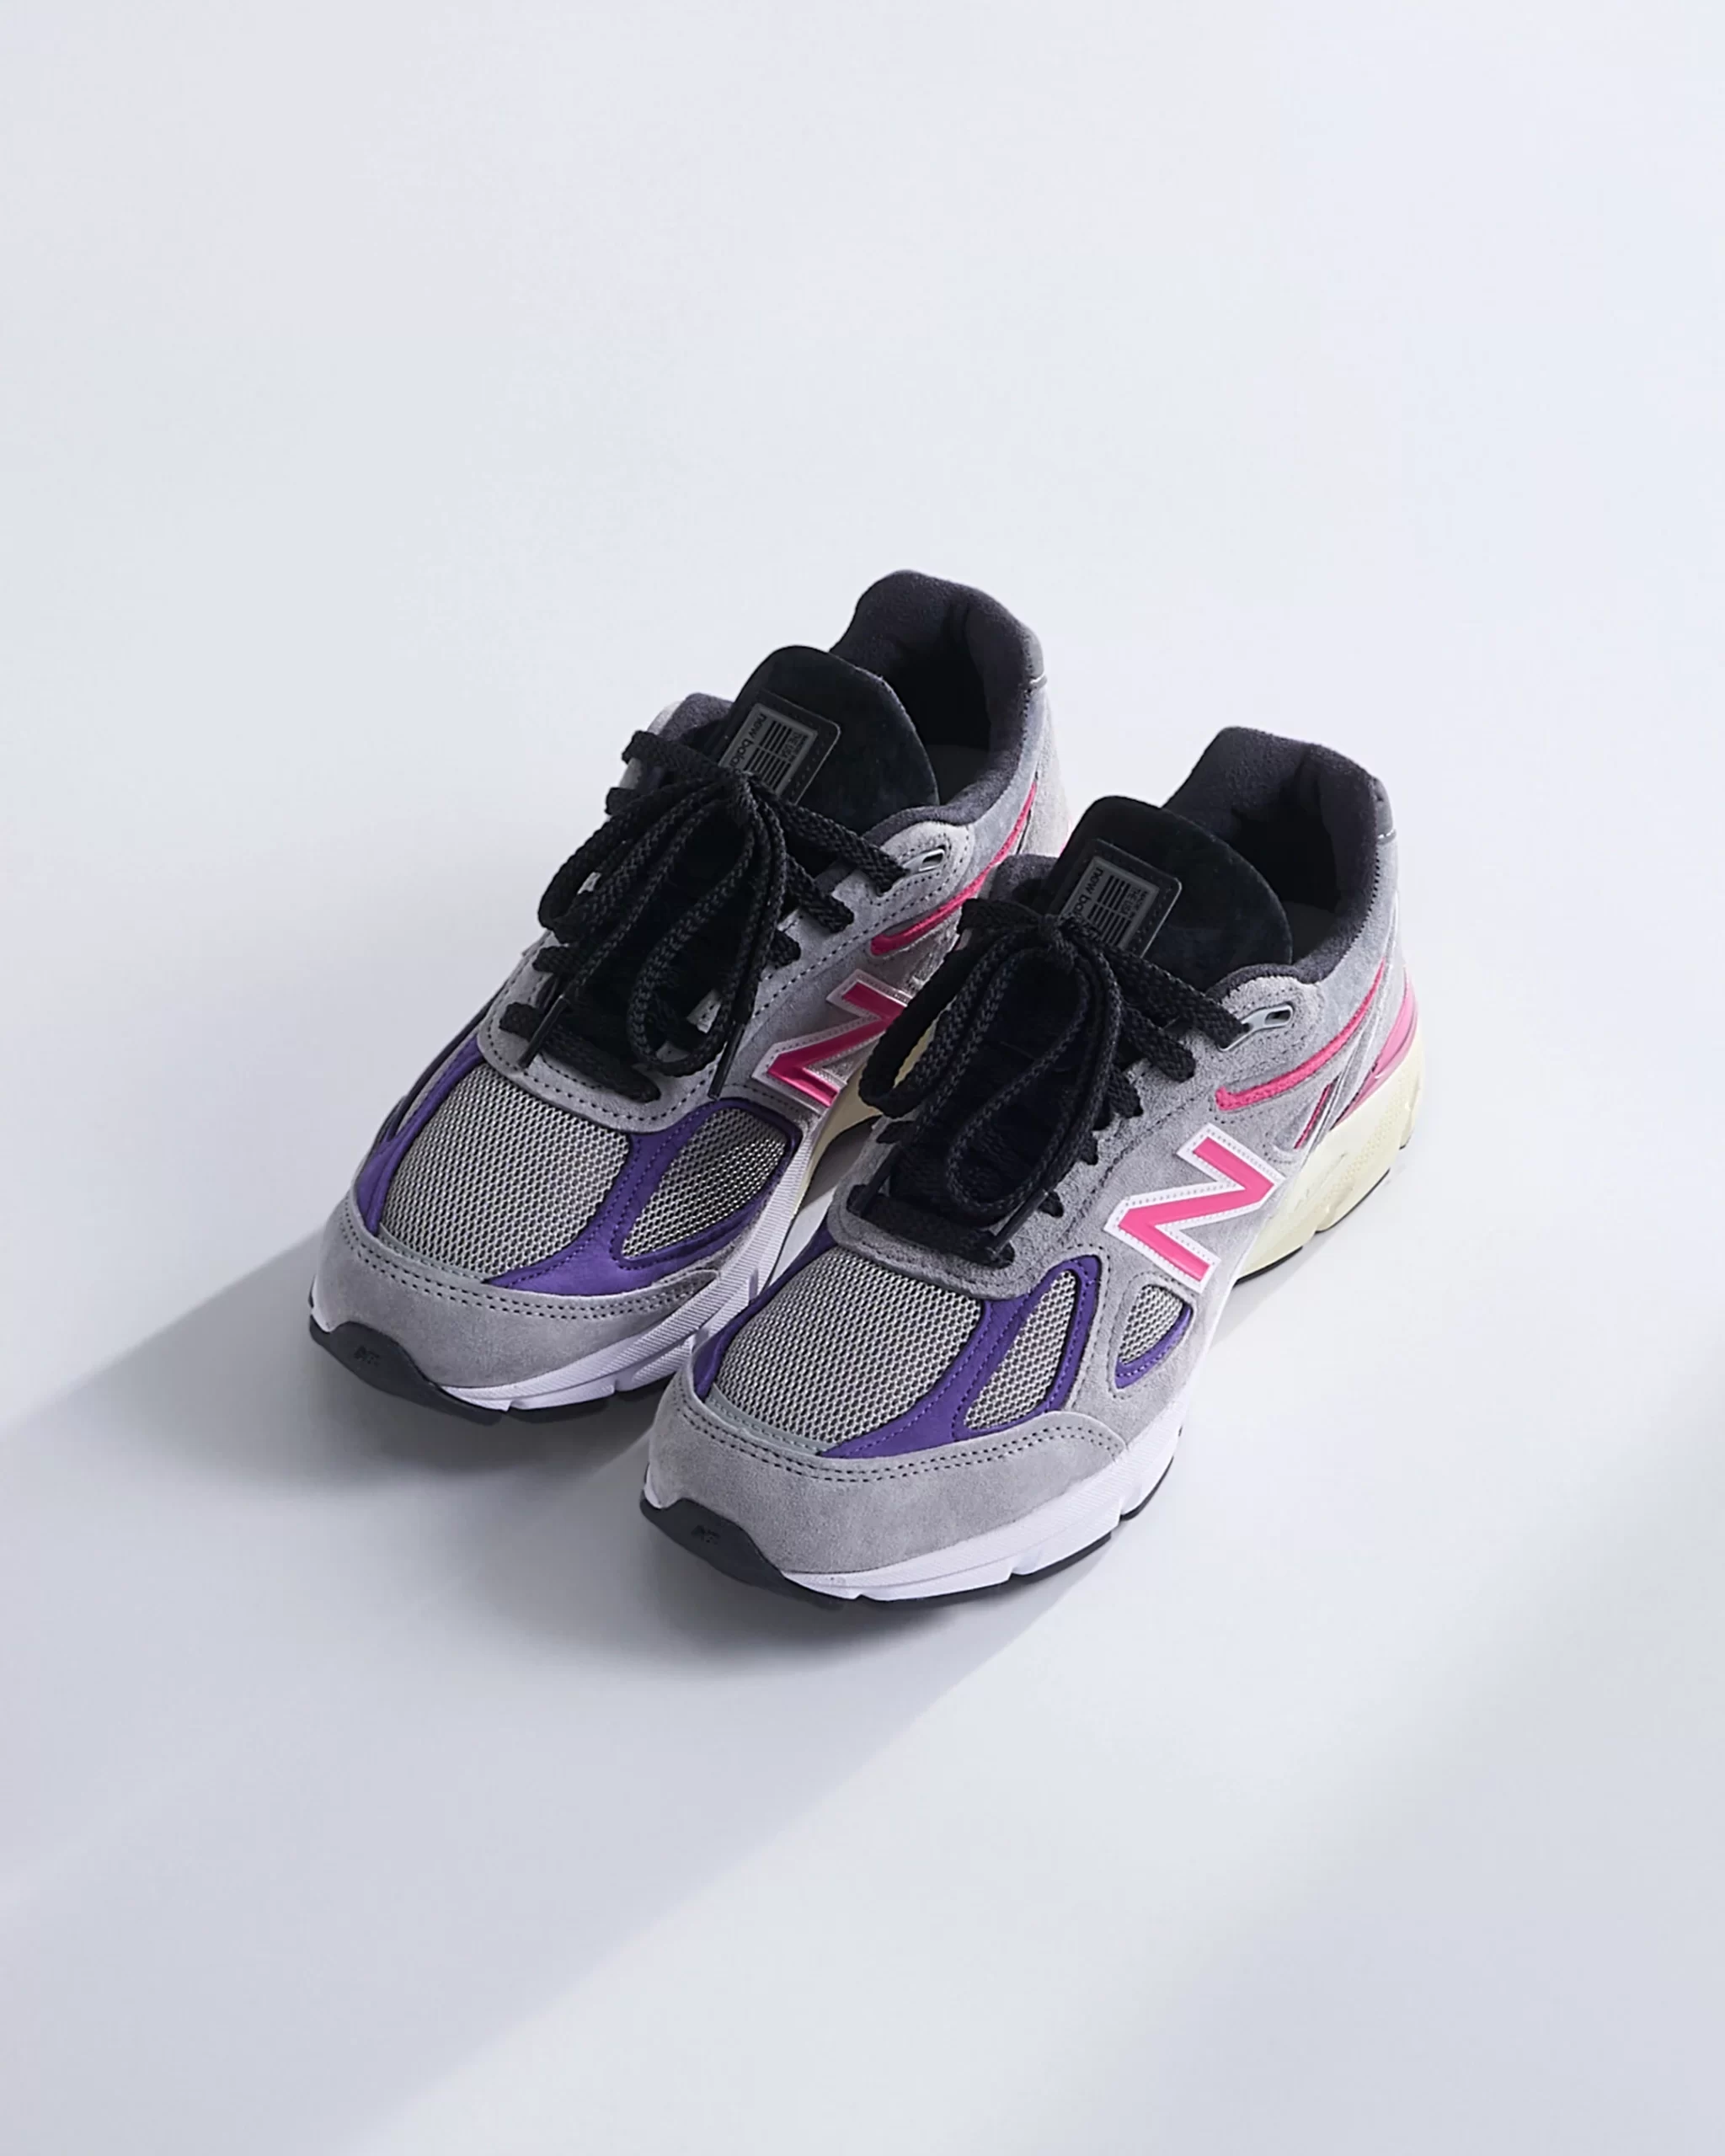 kith-ronnie-fieg-for-new-balance-990-anniversary-collection-release-20220615